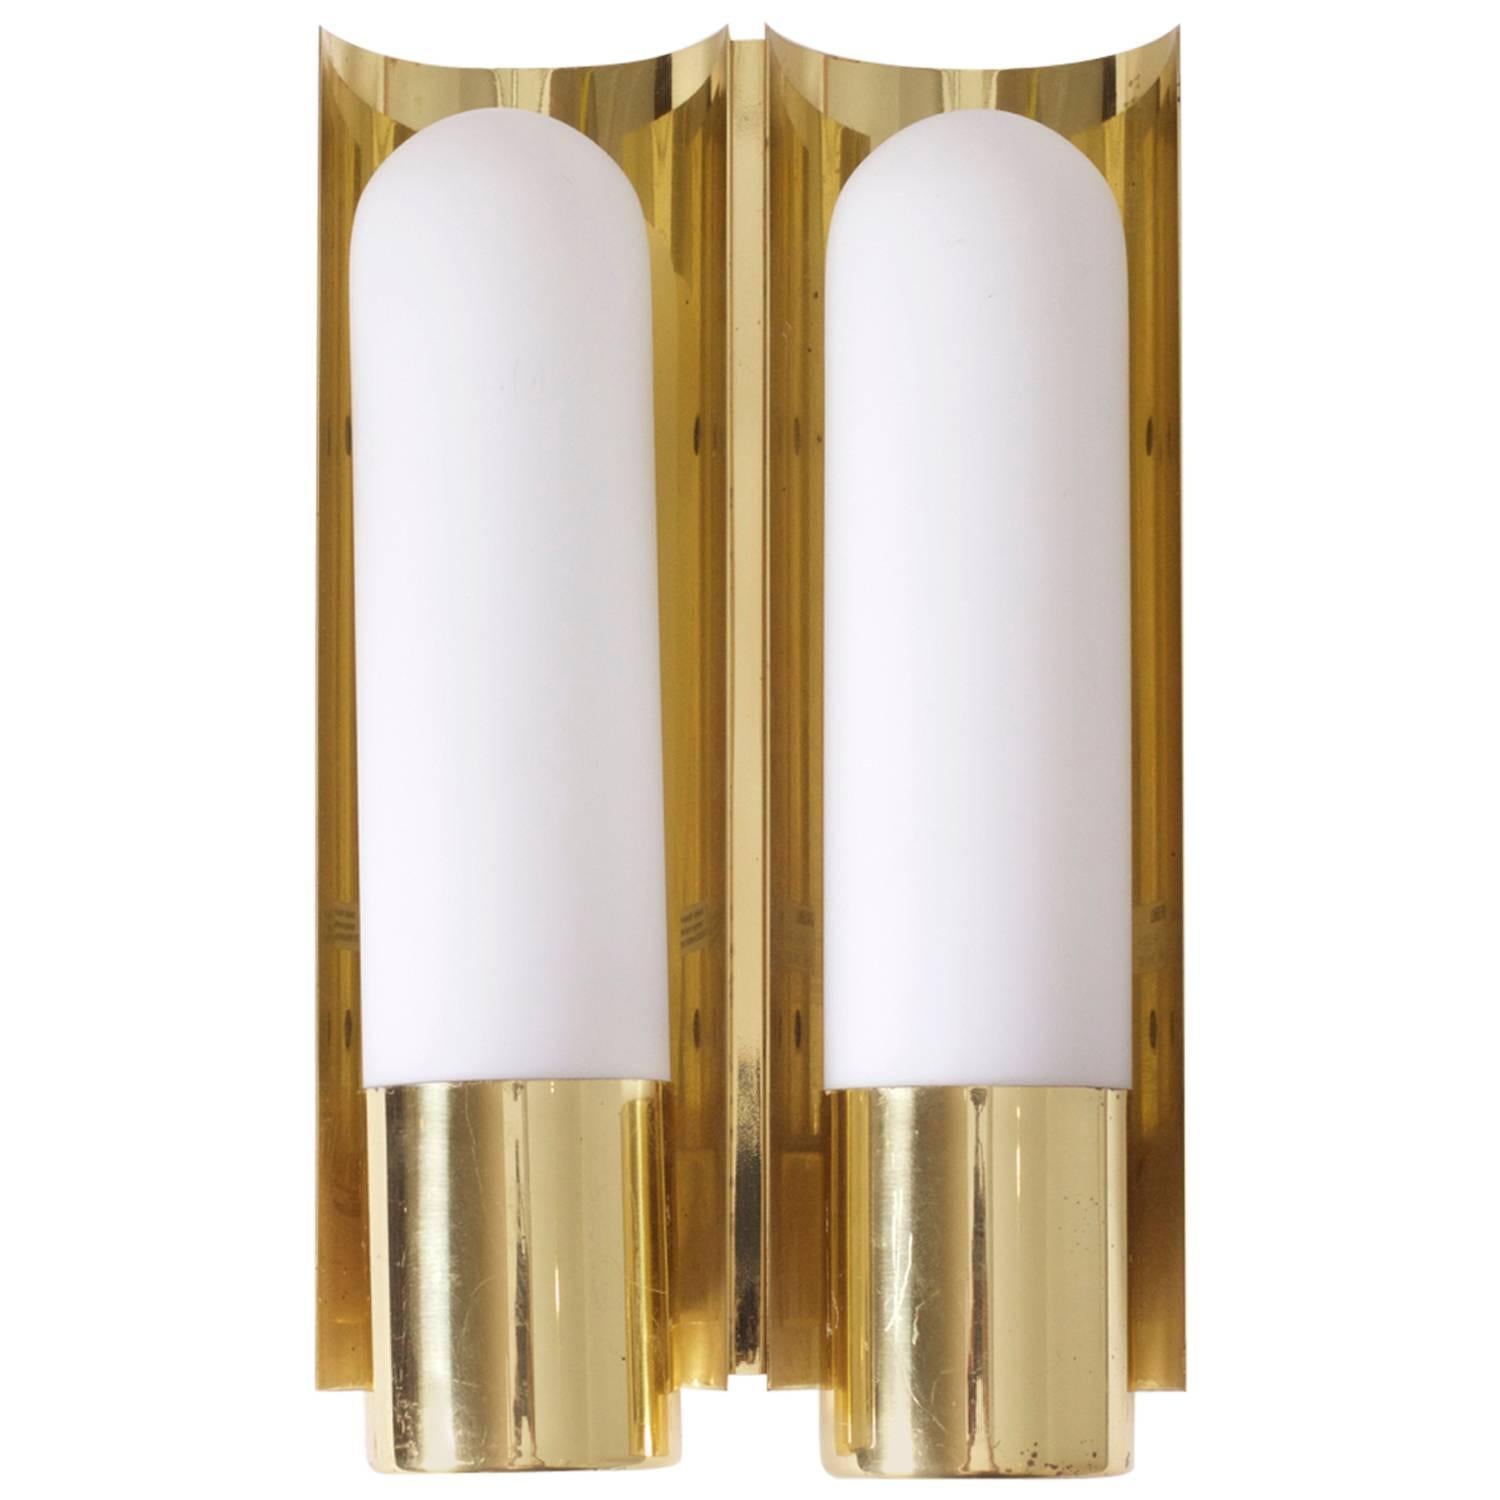 Set of Two Brass and Glass Wall Lights or Sconces by Glashütte Limburg